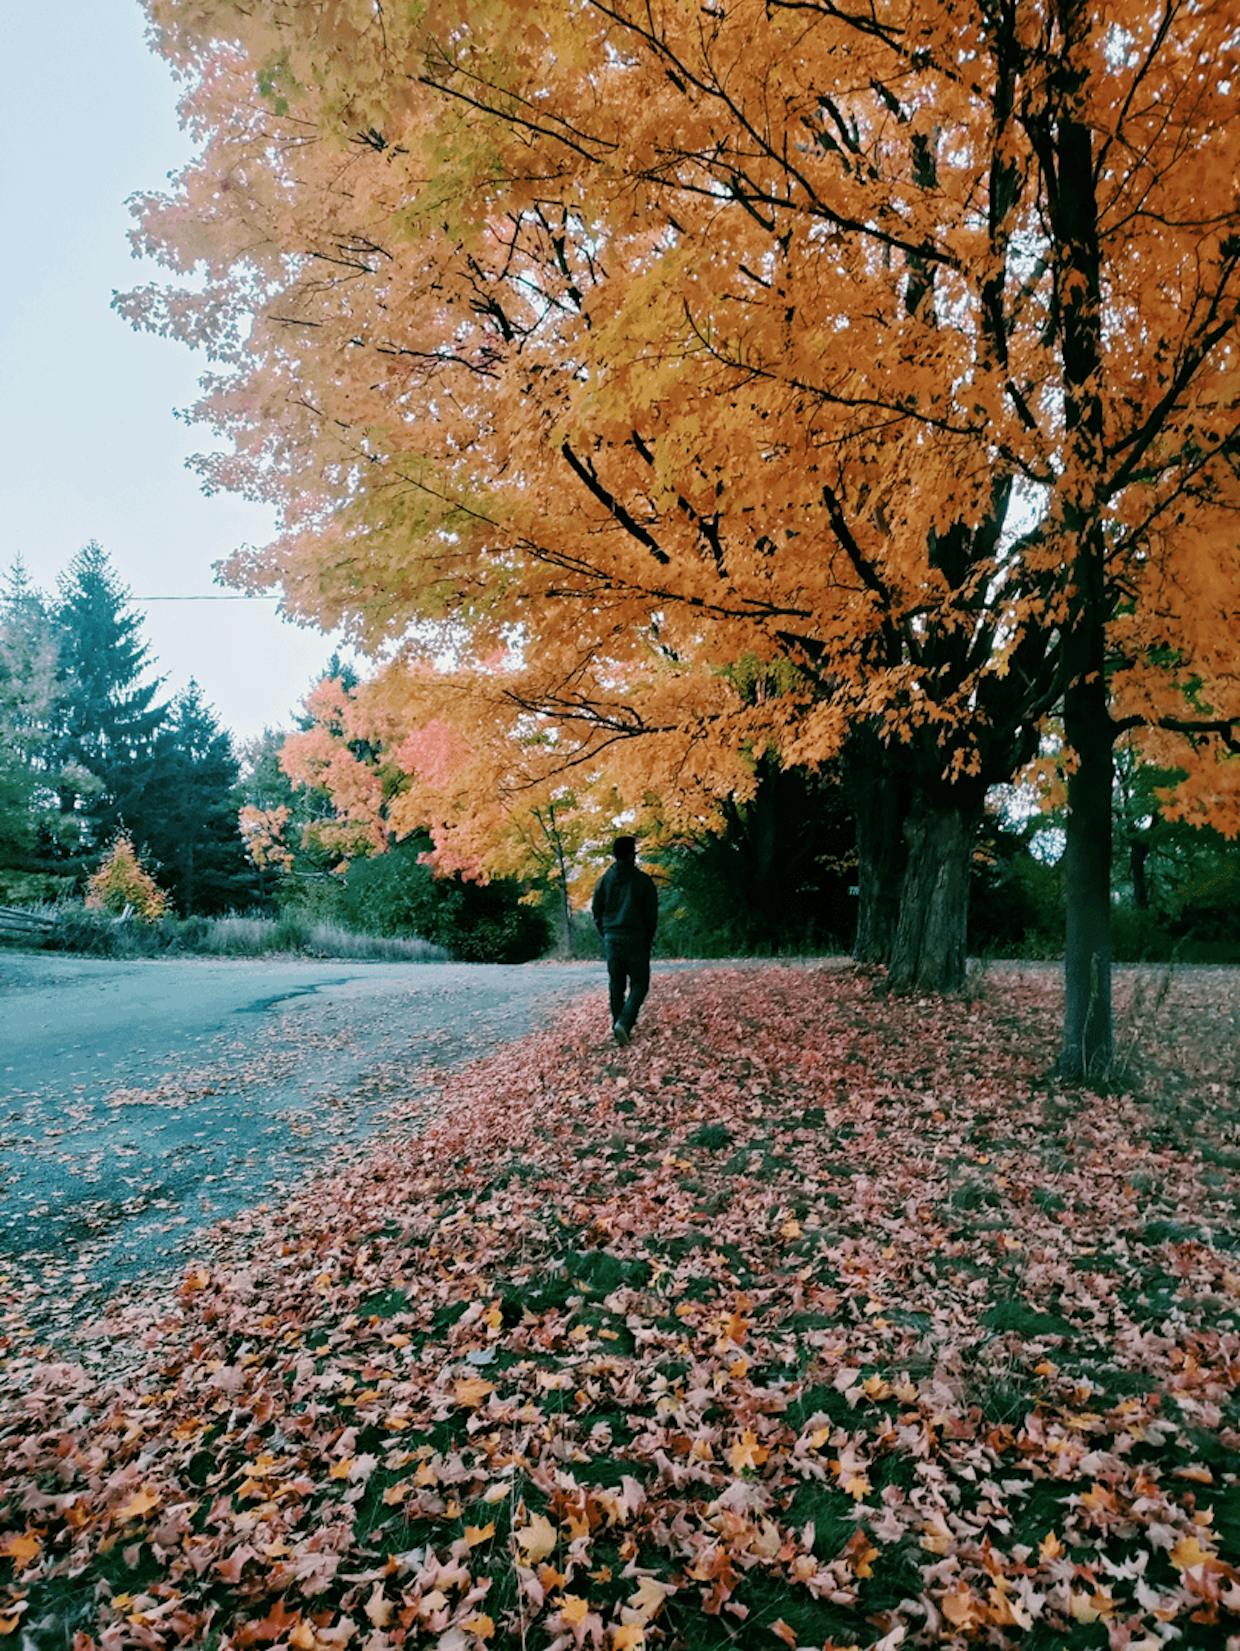 My click at Forks of the credit park during fall 